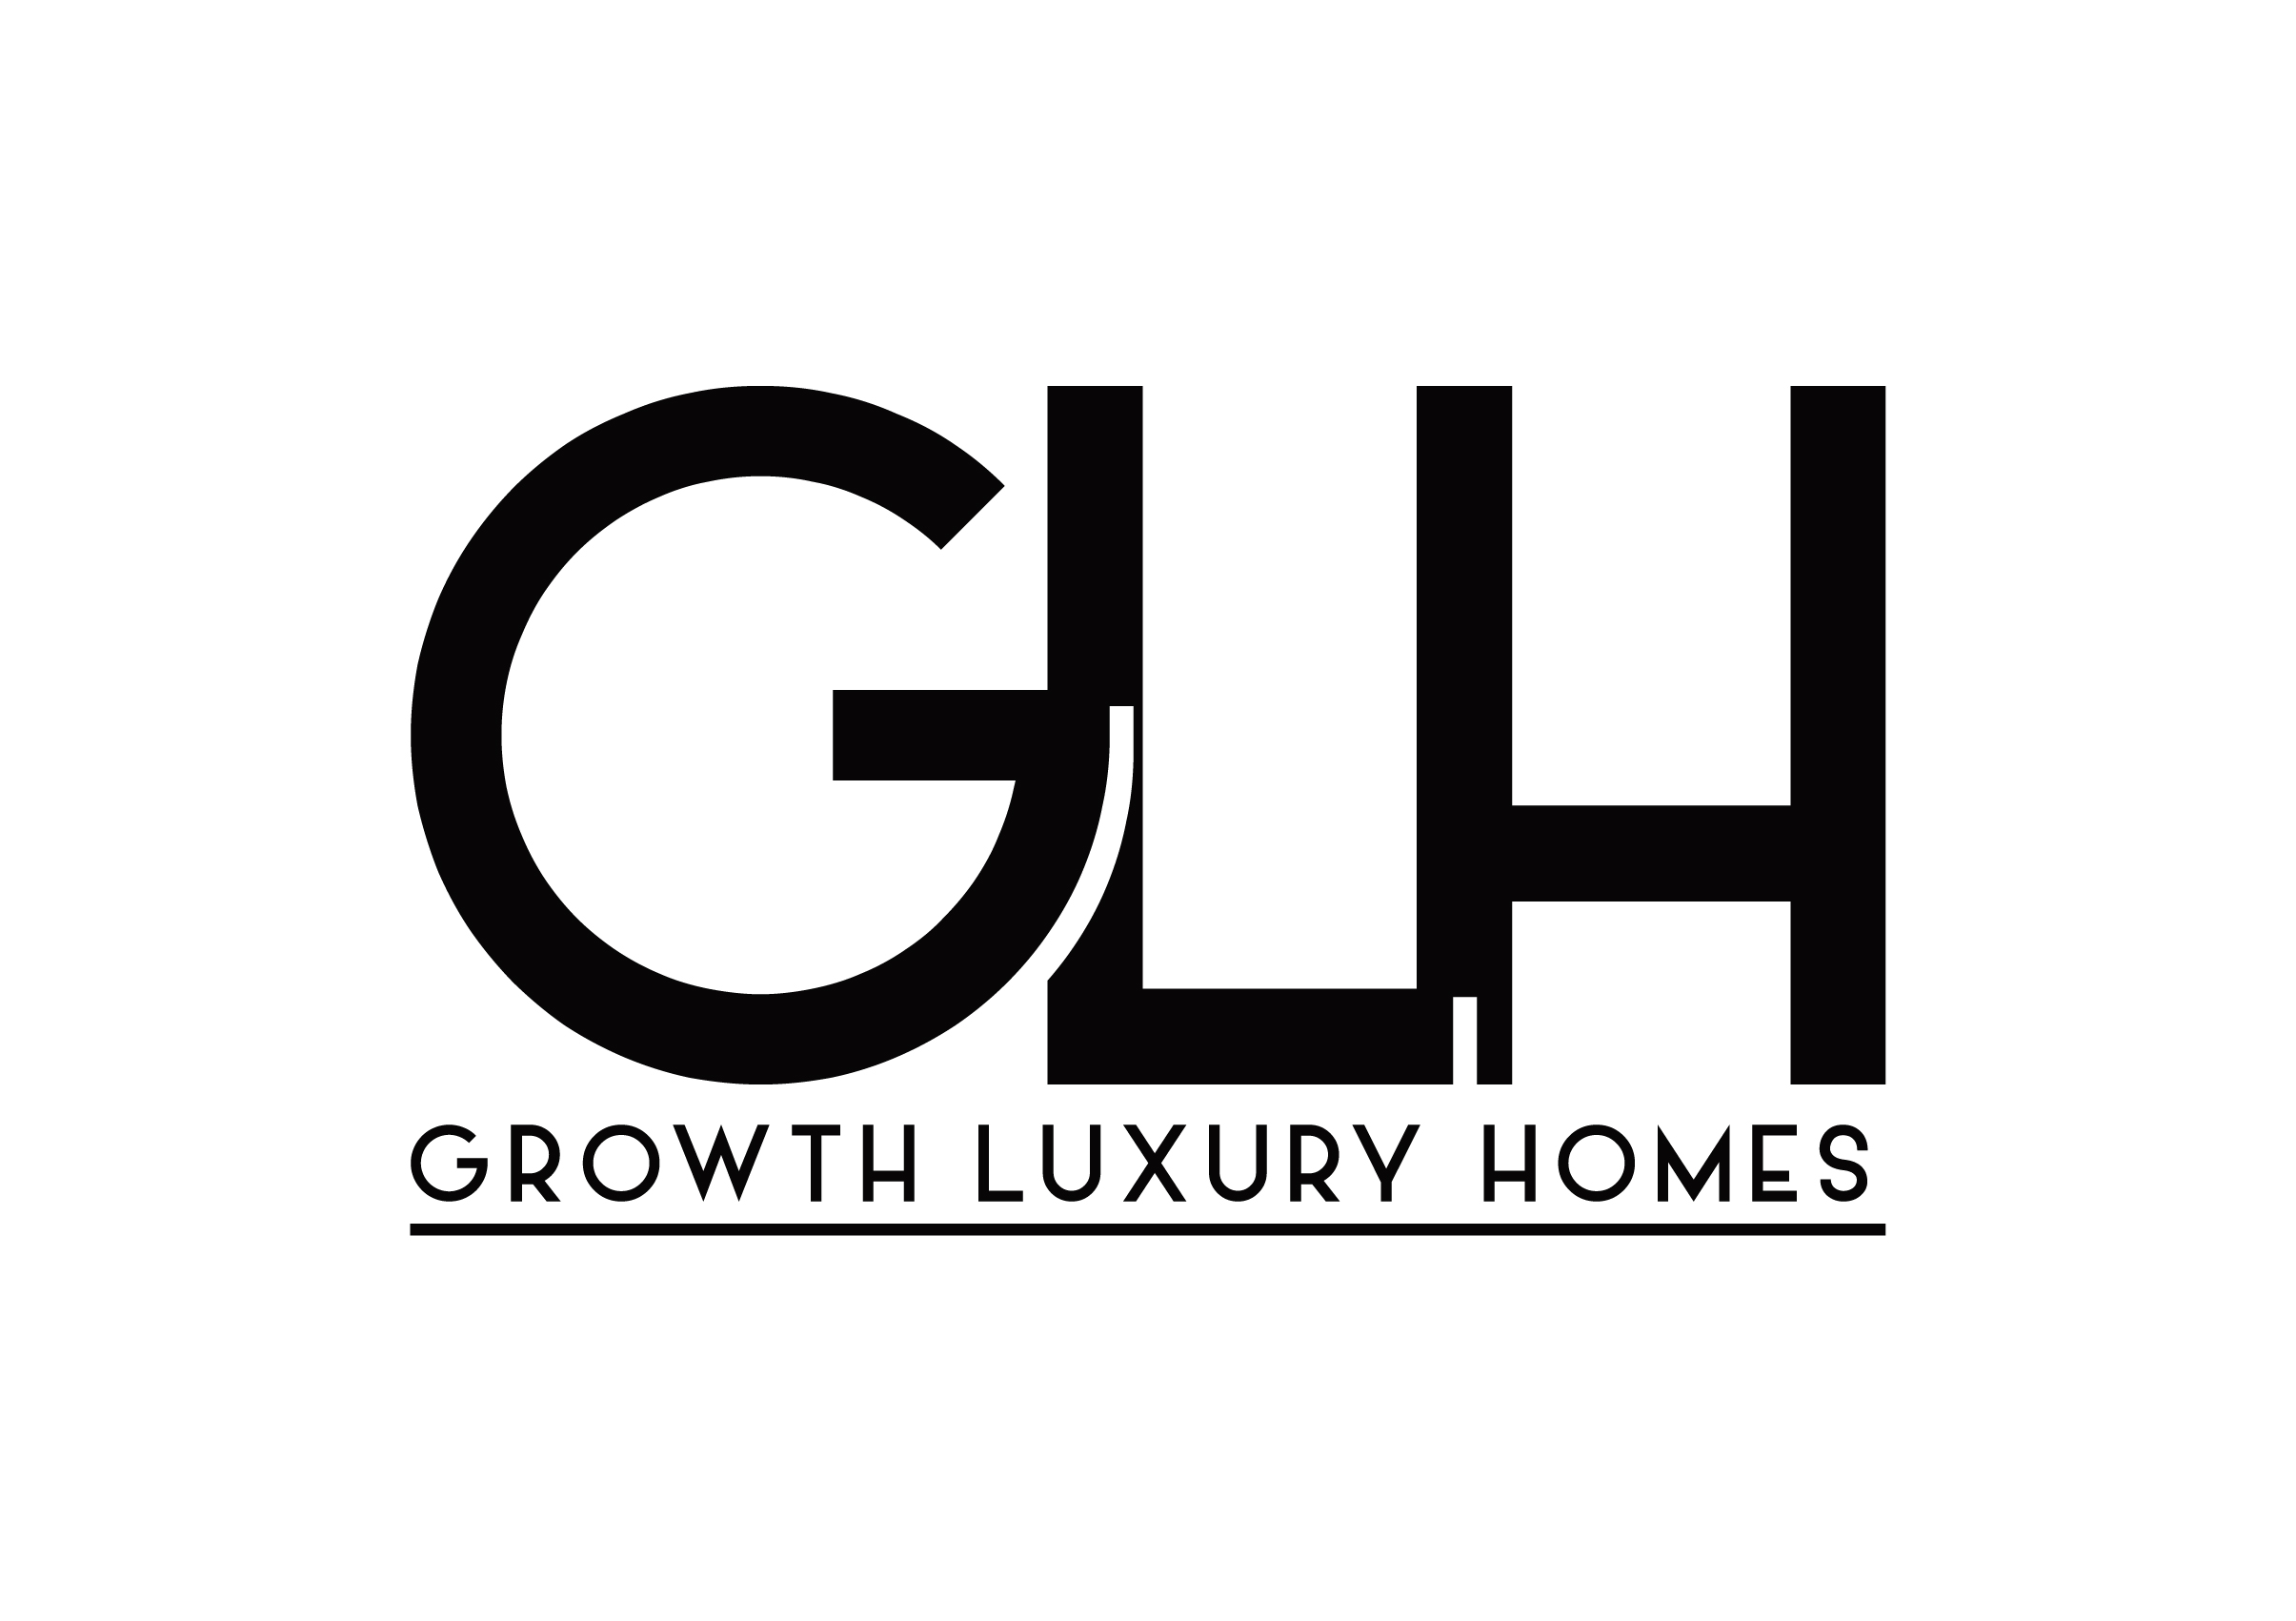 Growth Luxury Homes